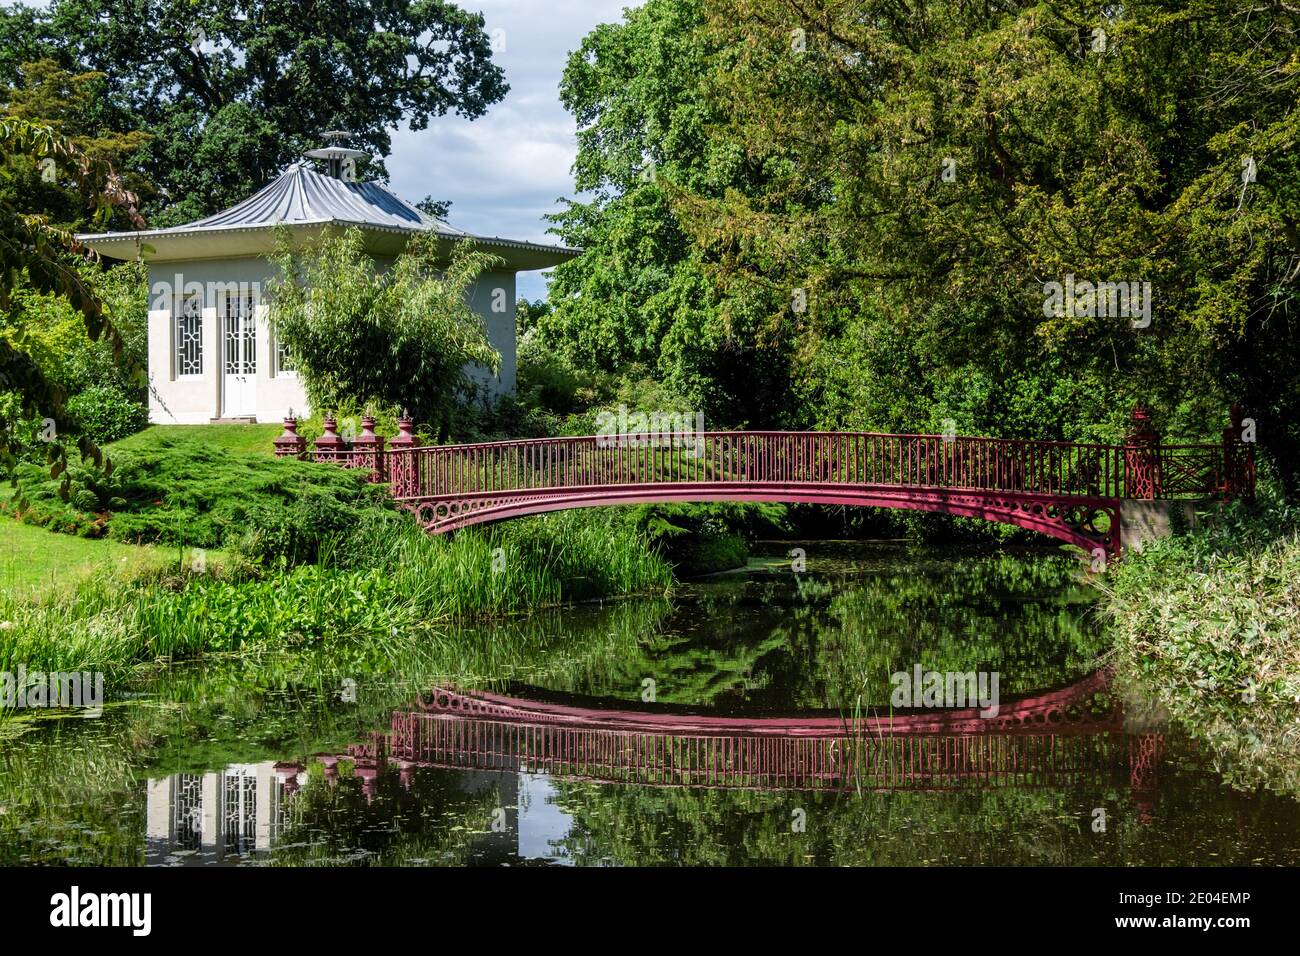 The Chinese House, located in the grounds of the Shugborough Estate, near to Stafford, Staffordshire, England, UK Stock Photo